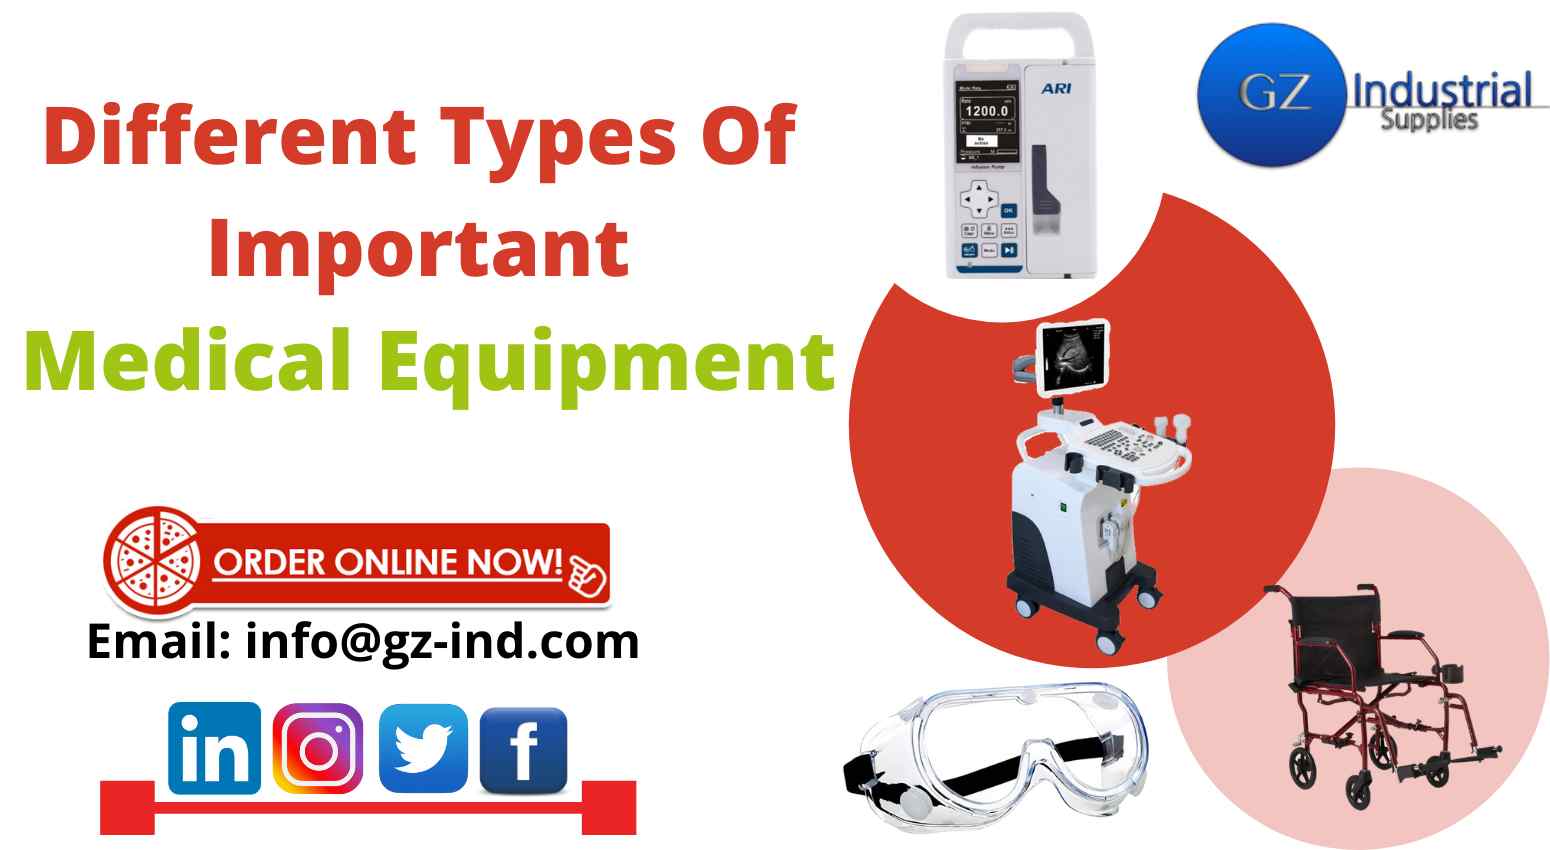 What is the Most Important Medical Equipment?